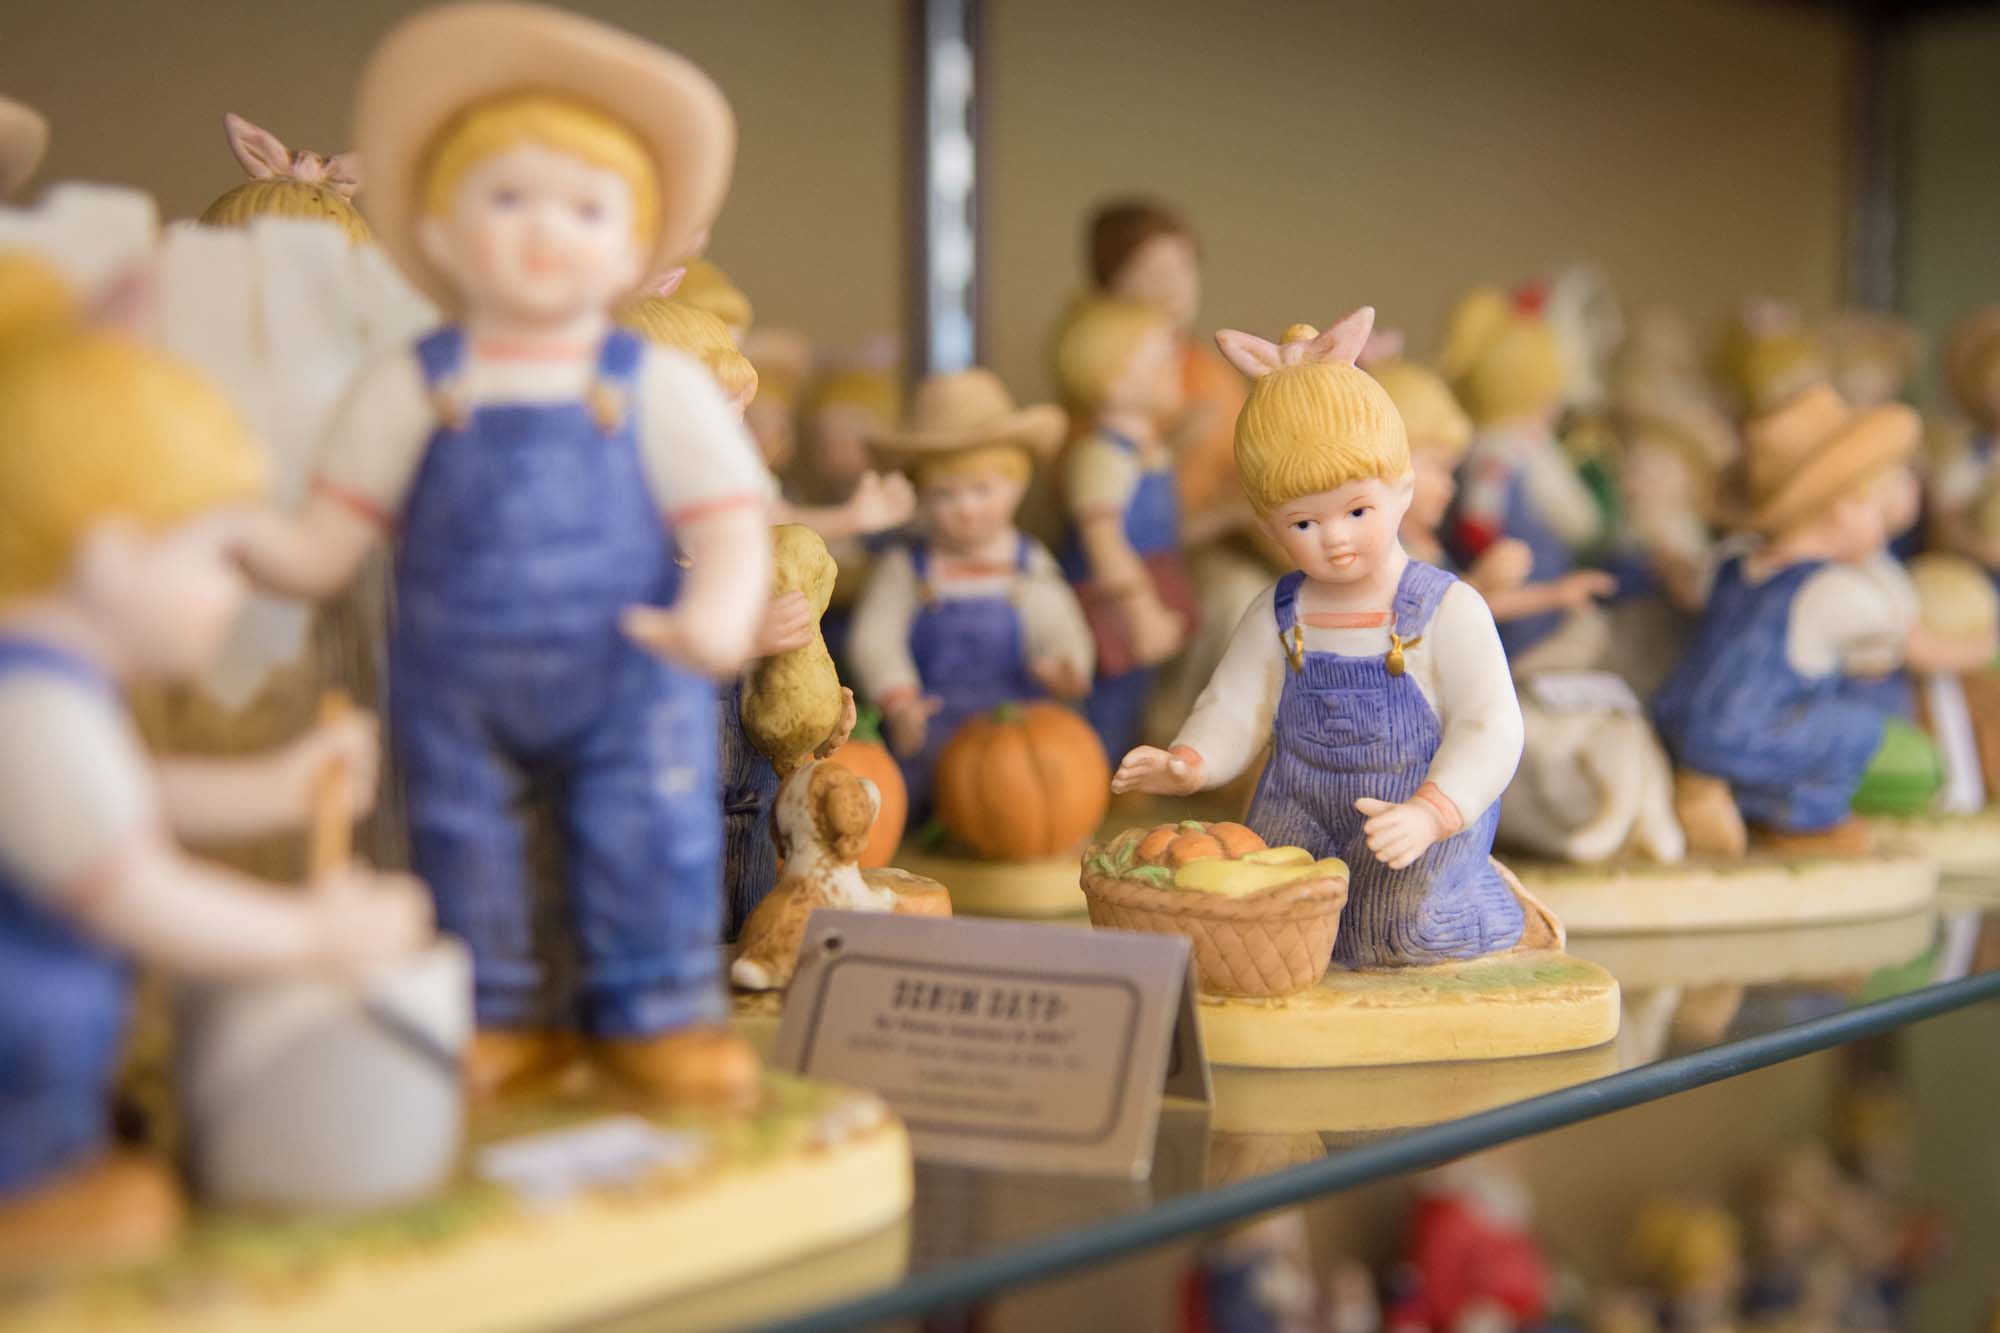 A photo of figurines at the Community Thrift Store